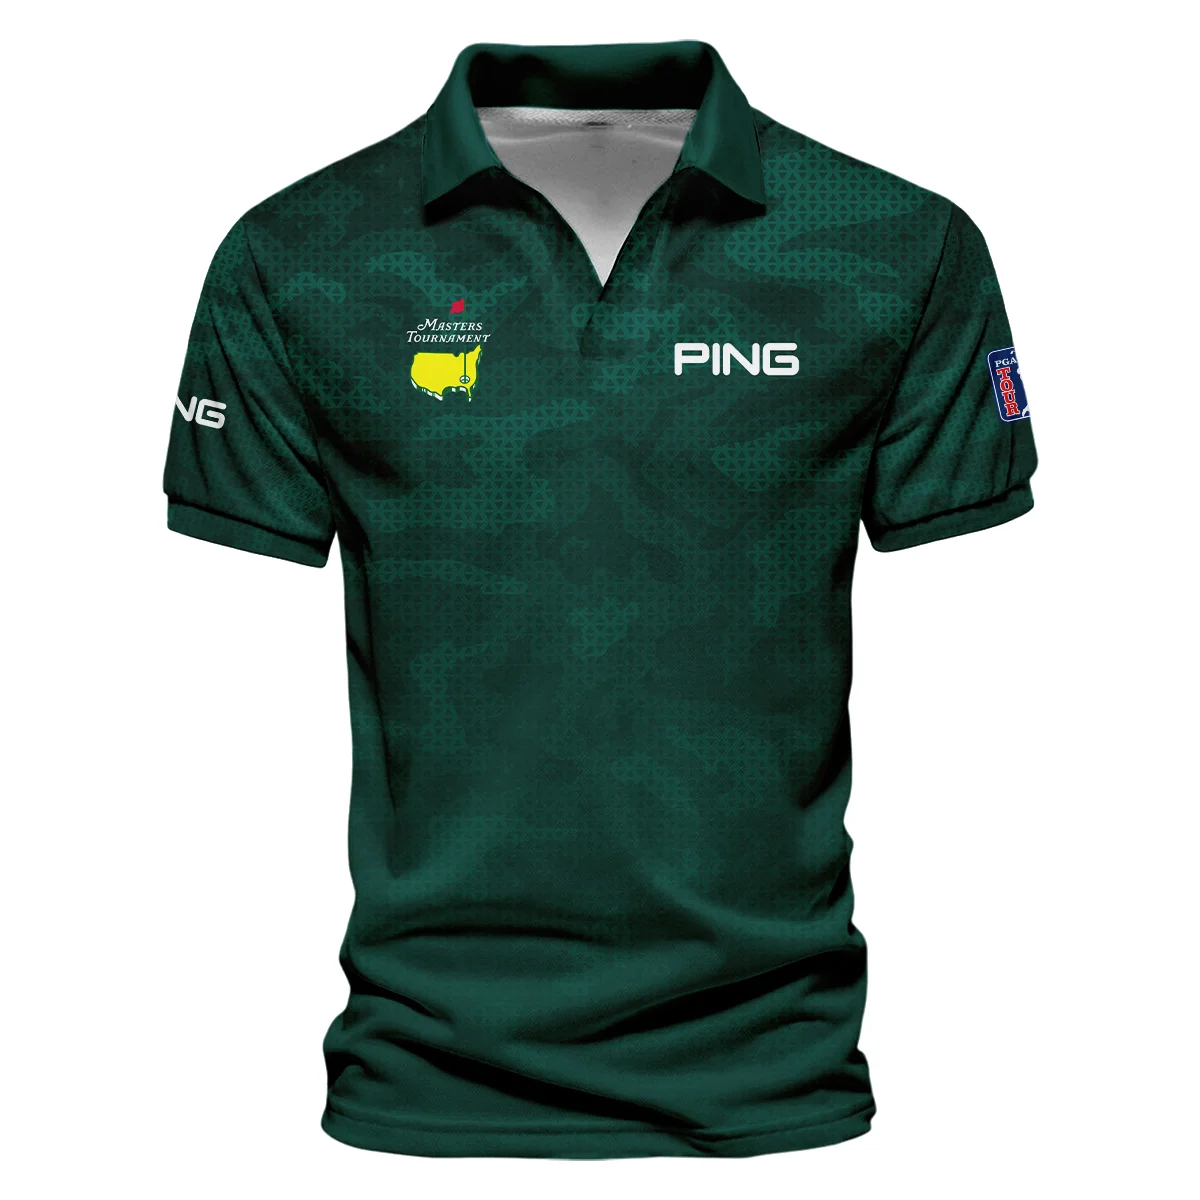 Masters Tournament Ping Camo Sport Green Abstract Vneck Polo Shirt Style Classic Polo Shirt For Men